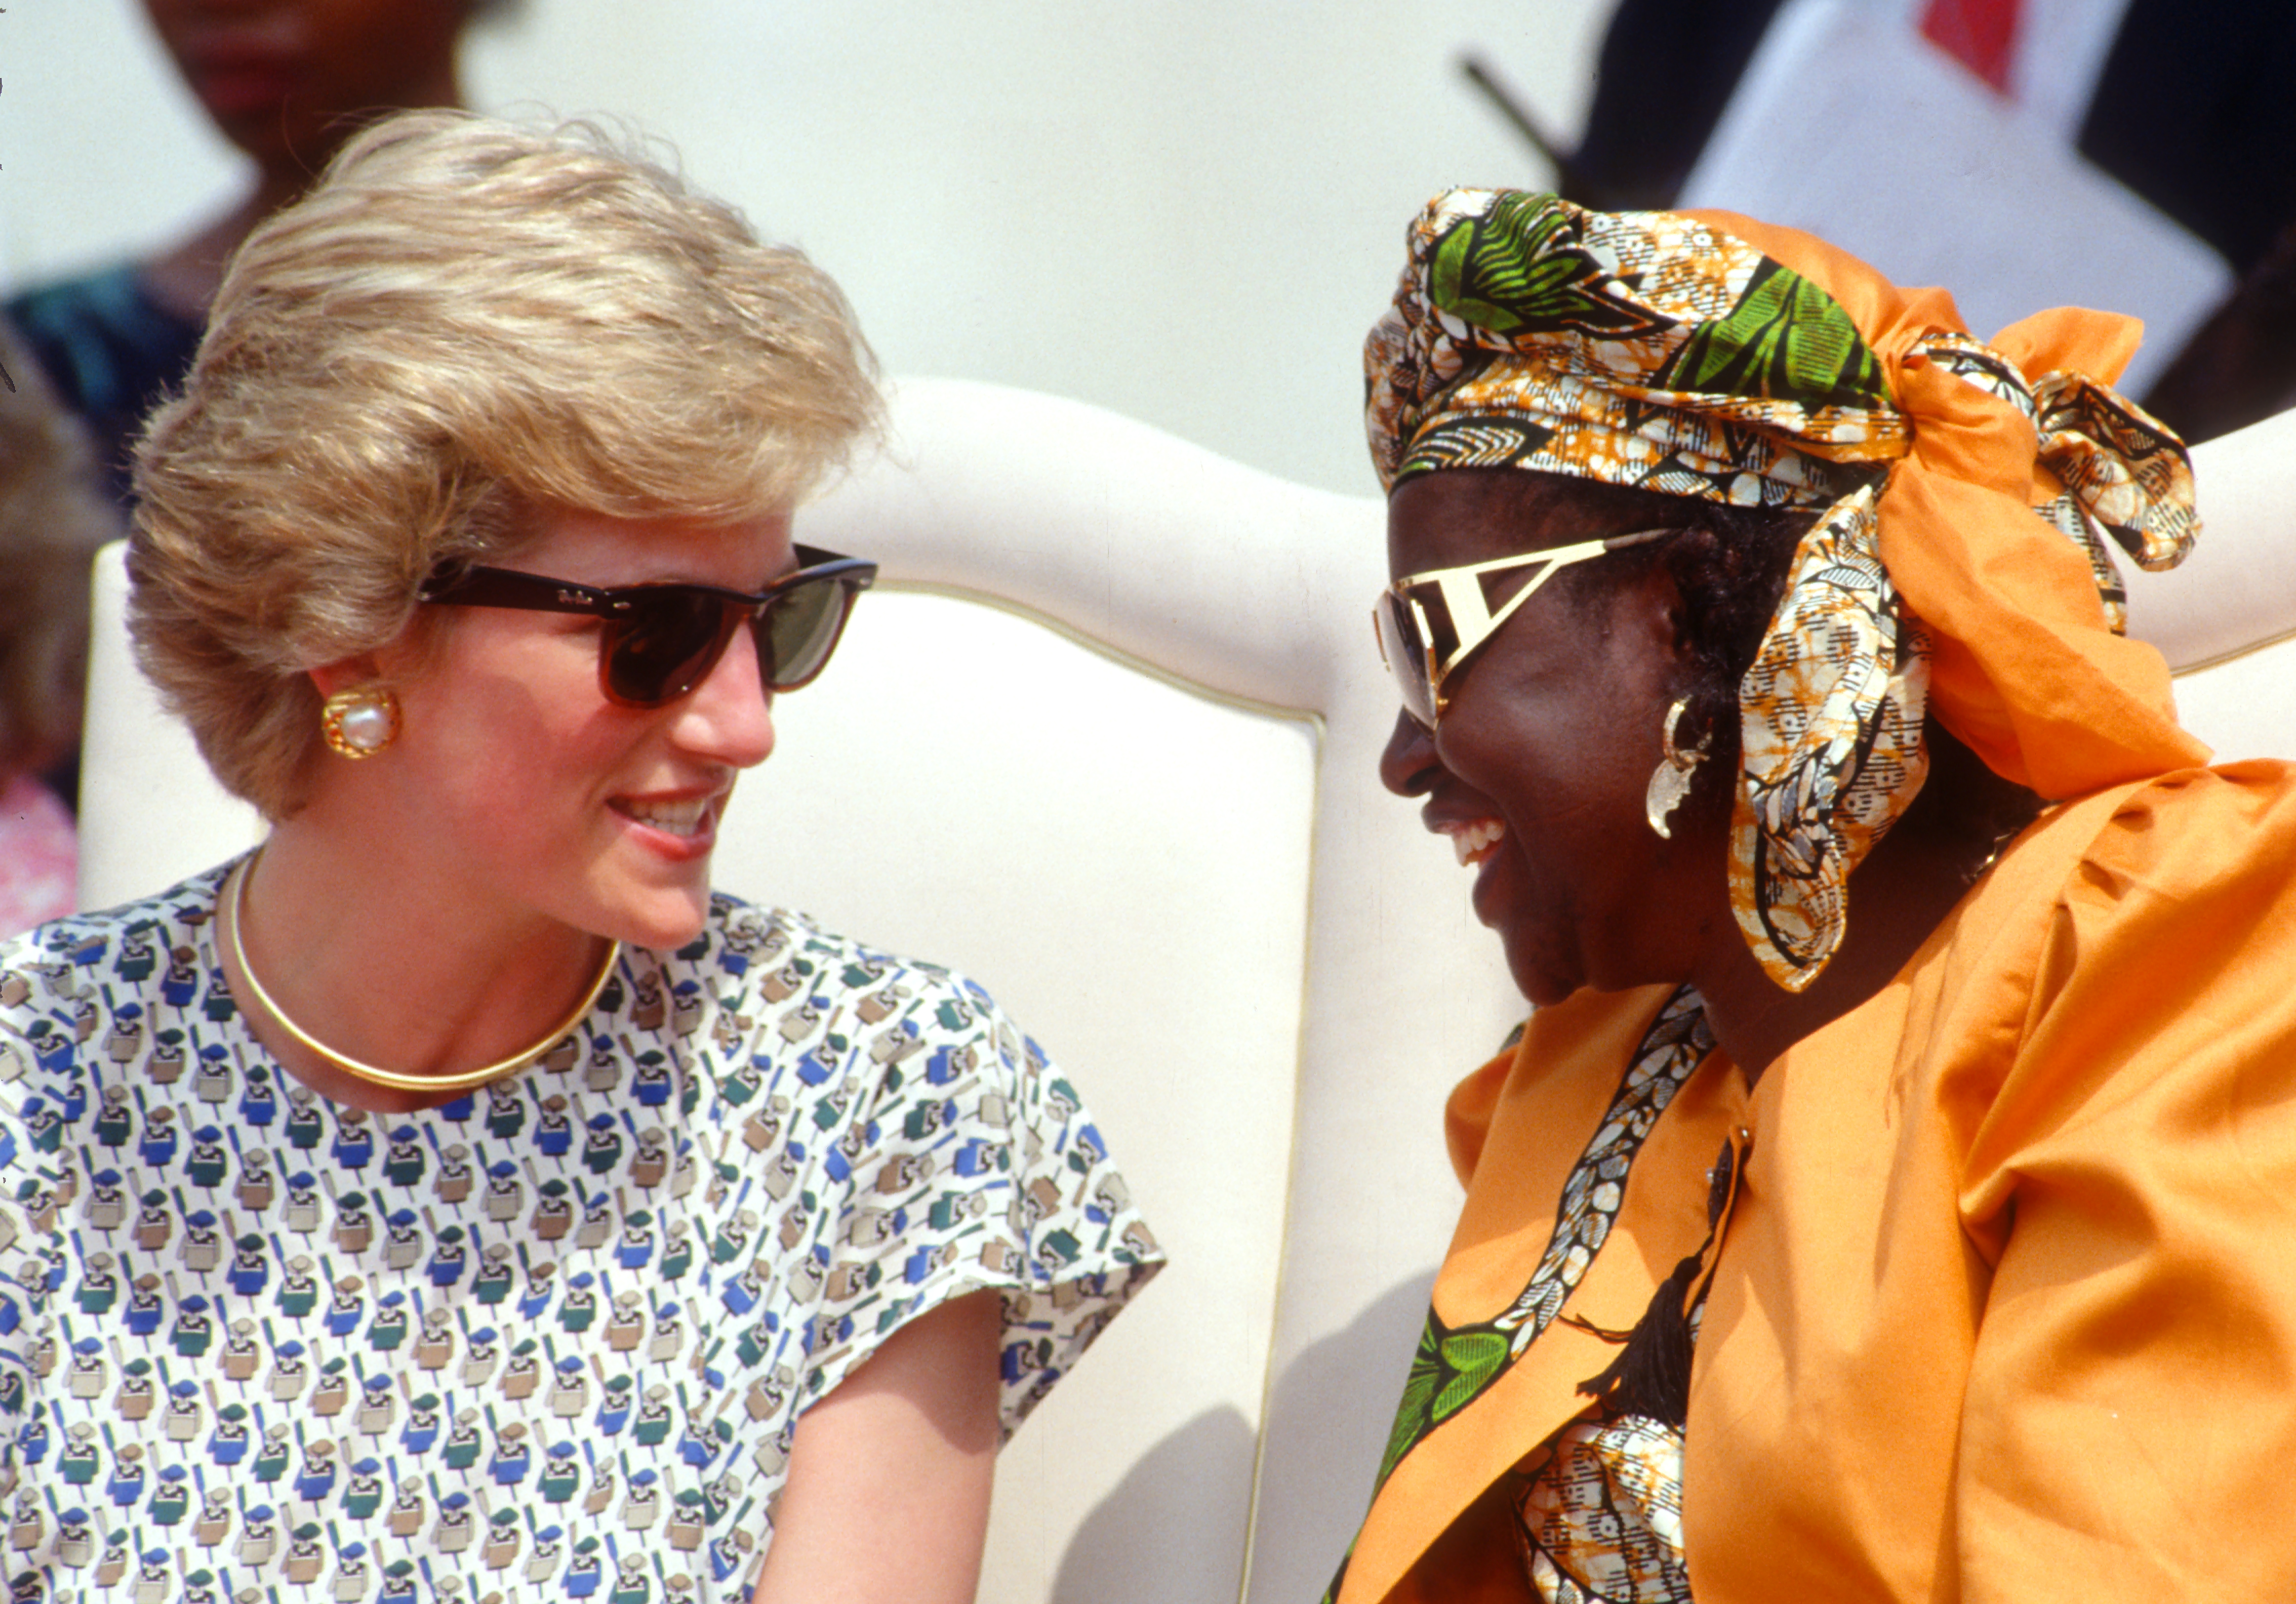 Princess Diana of Wales speaks to Nigerian First Lady, Maryam Babangida, as they attend a Better Life For Rural Dwellers women's fair in Tafawa Balewa Square on March 16, 1990, in Lagos, Nigeria. | Source: Getty Images